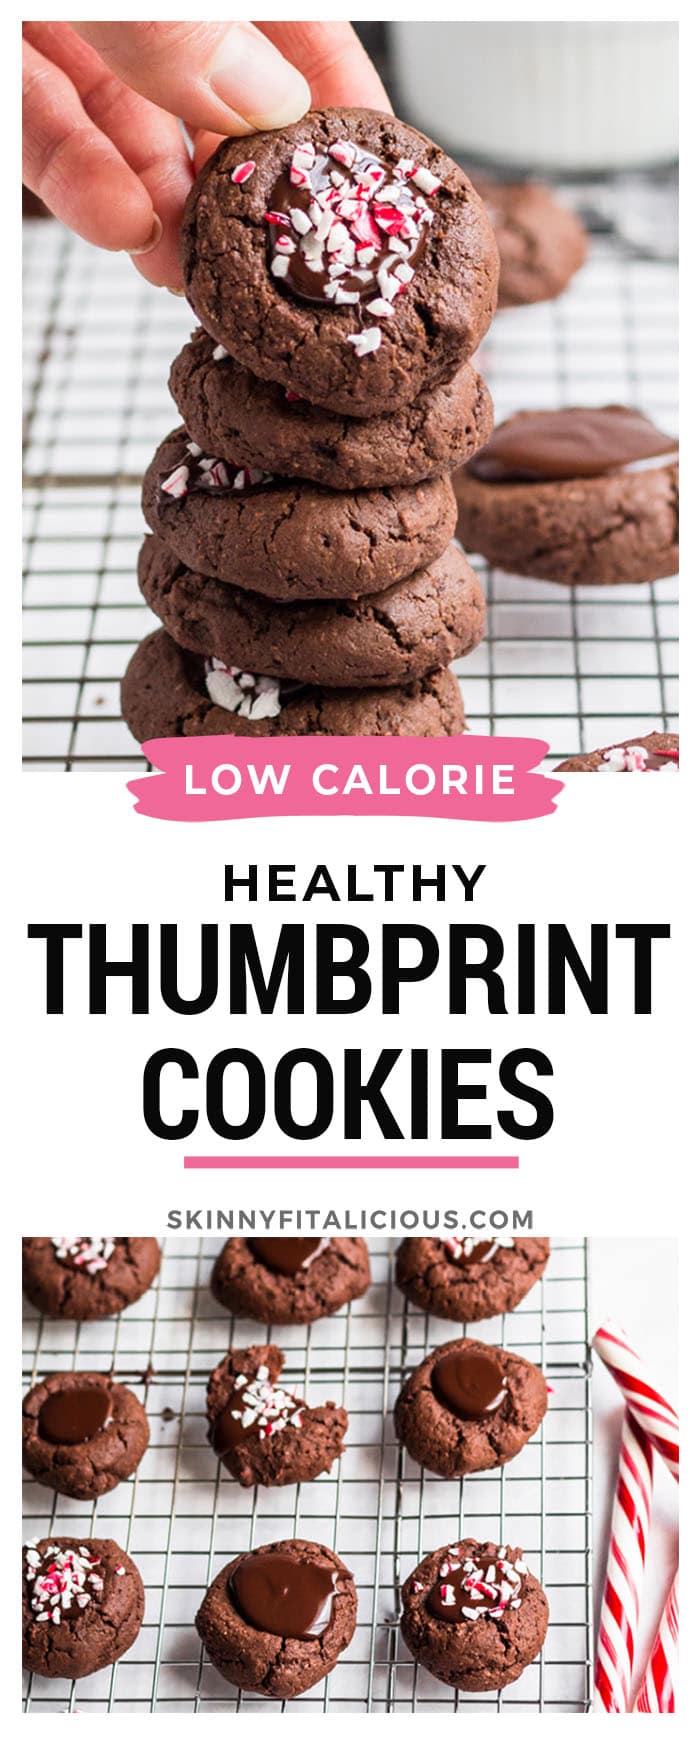 Healthy Chocolate Thumbprint Cookies made low calorie and gluten free are a delicious holiday cookie recipe with peppermint sprinkles on top!